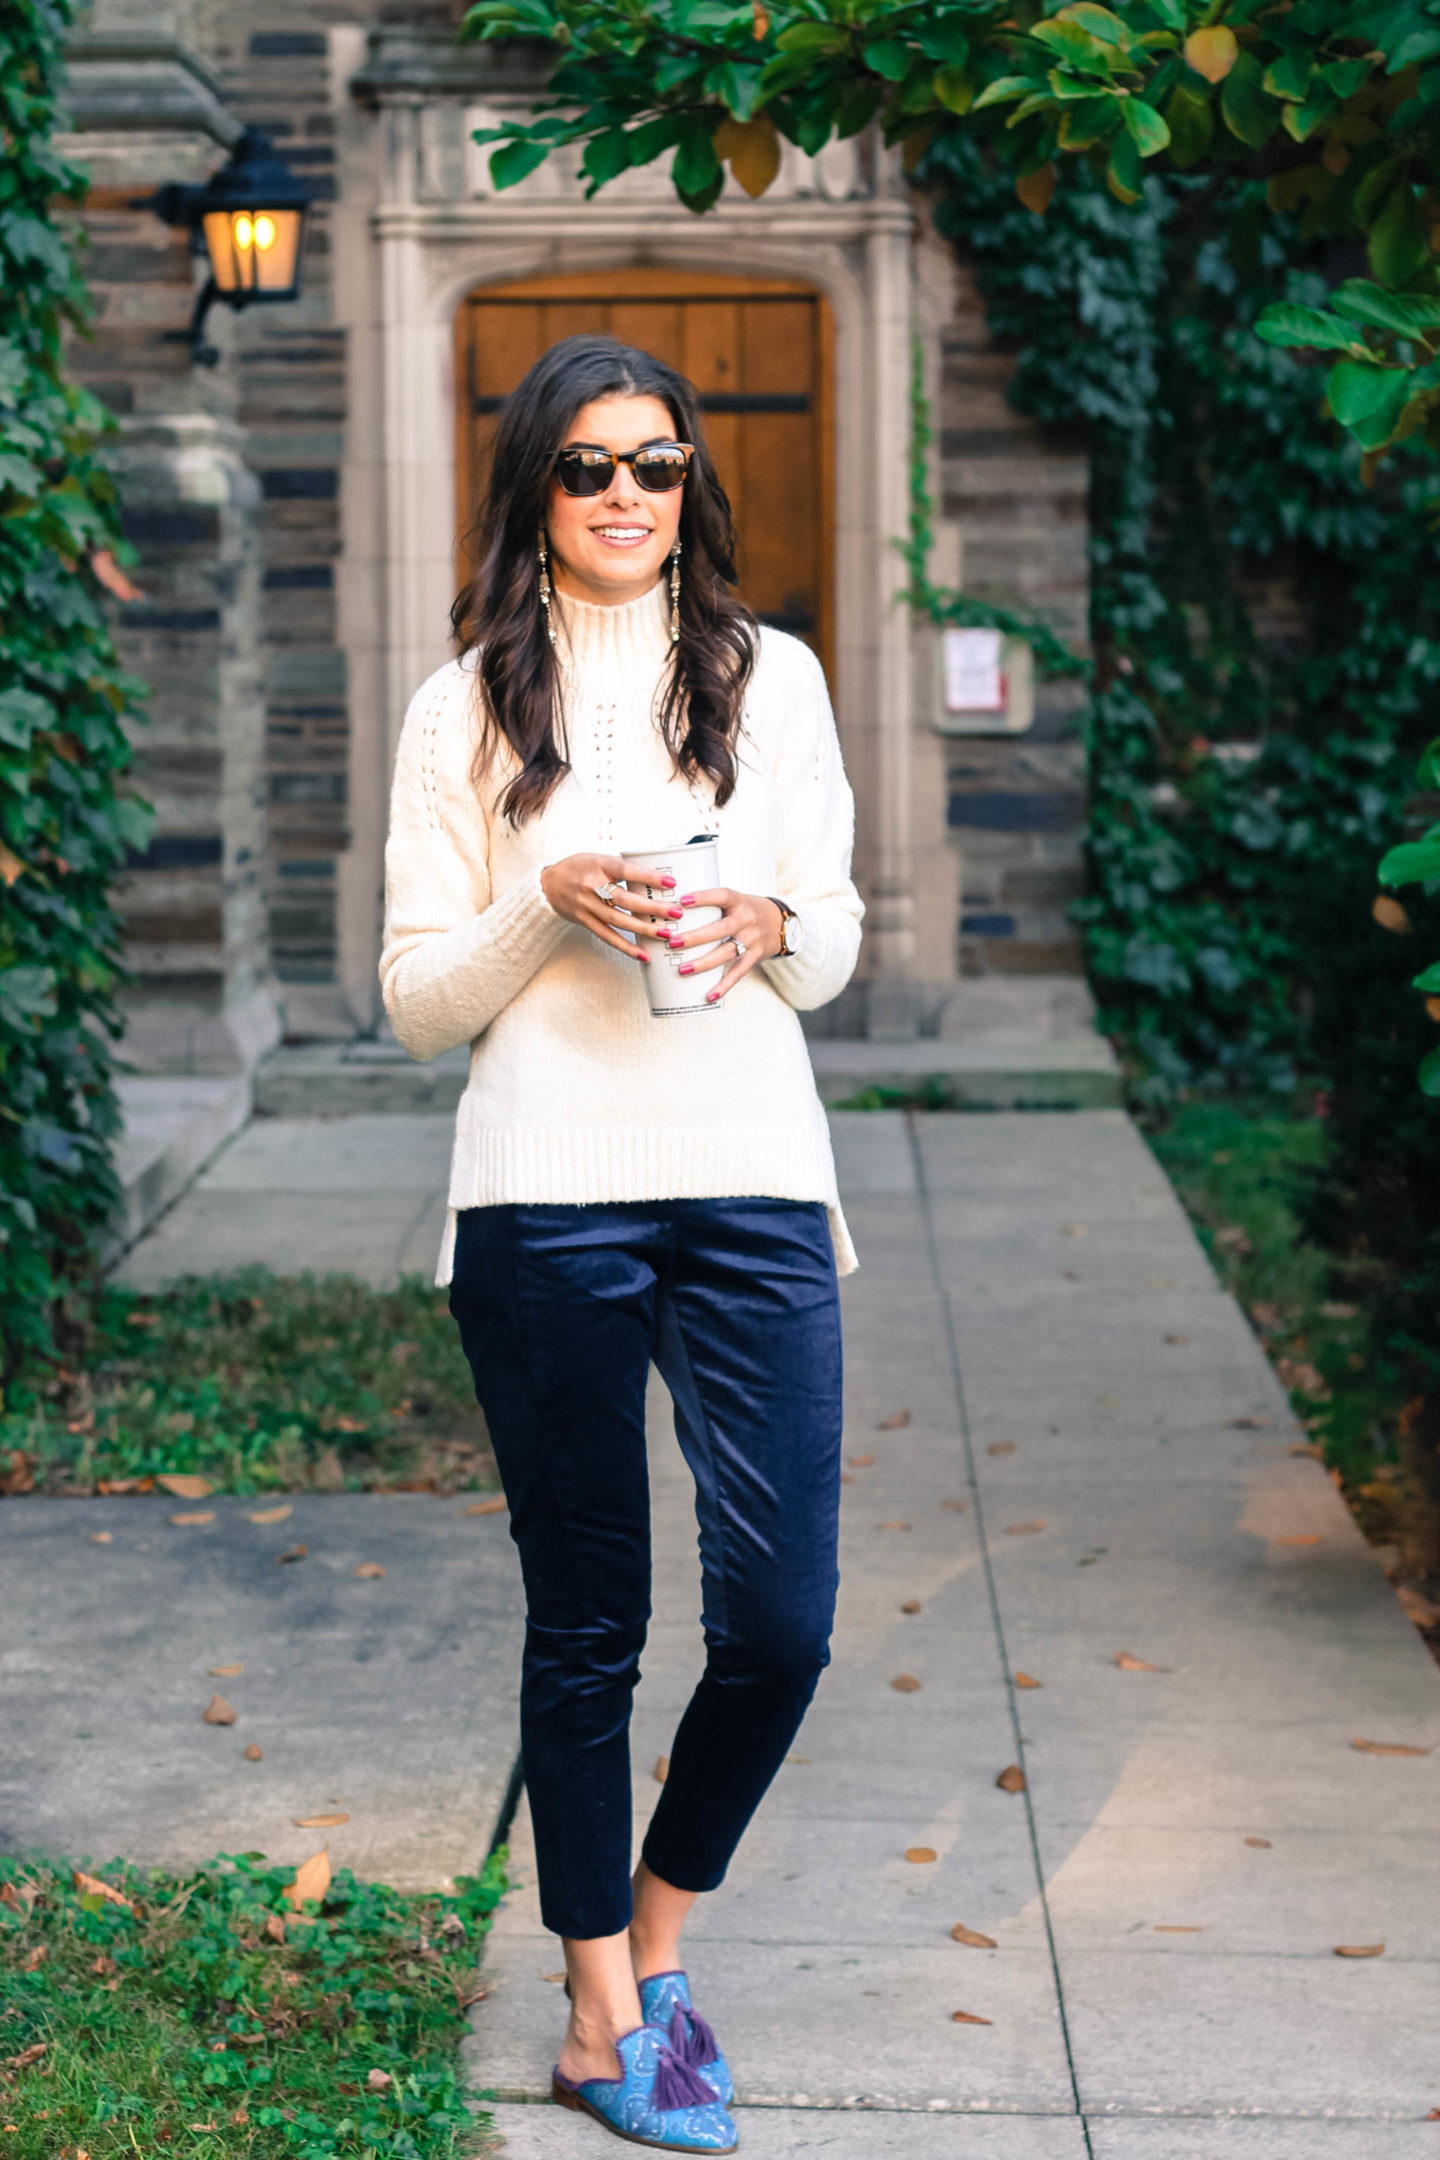 Velvet Pants With Banana Republic - Velvet Pants And A Cozy Sweater With Banana Republic by New York fashion blogger Style Waltz